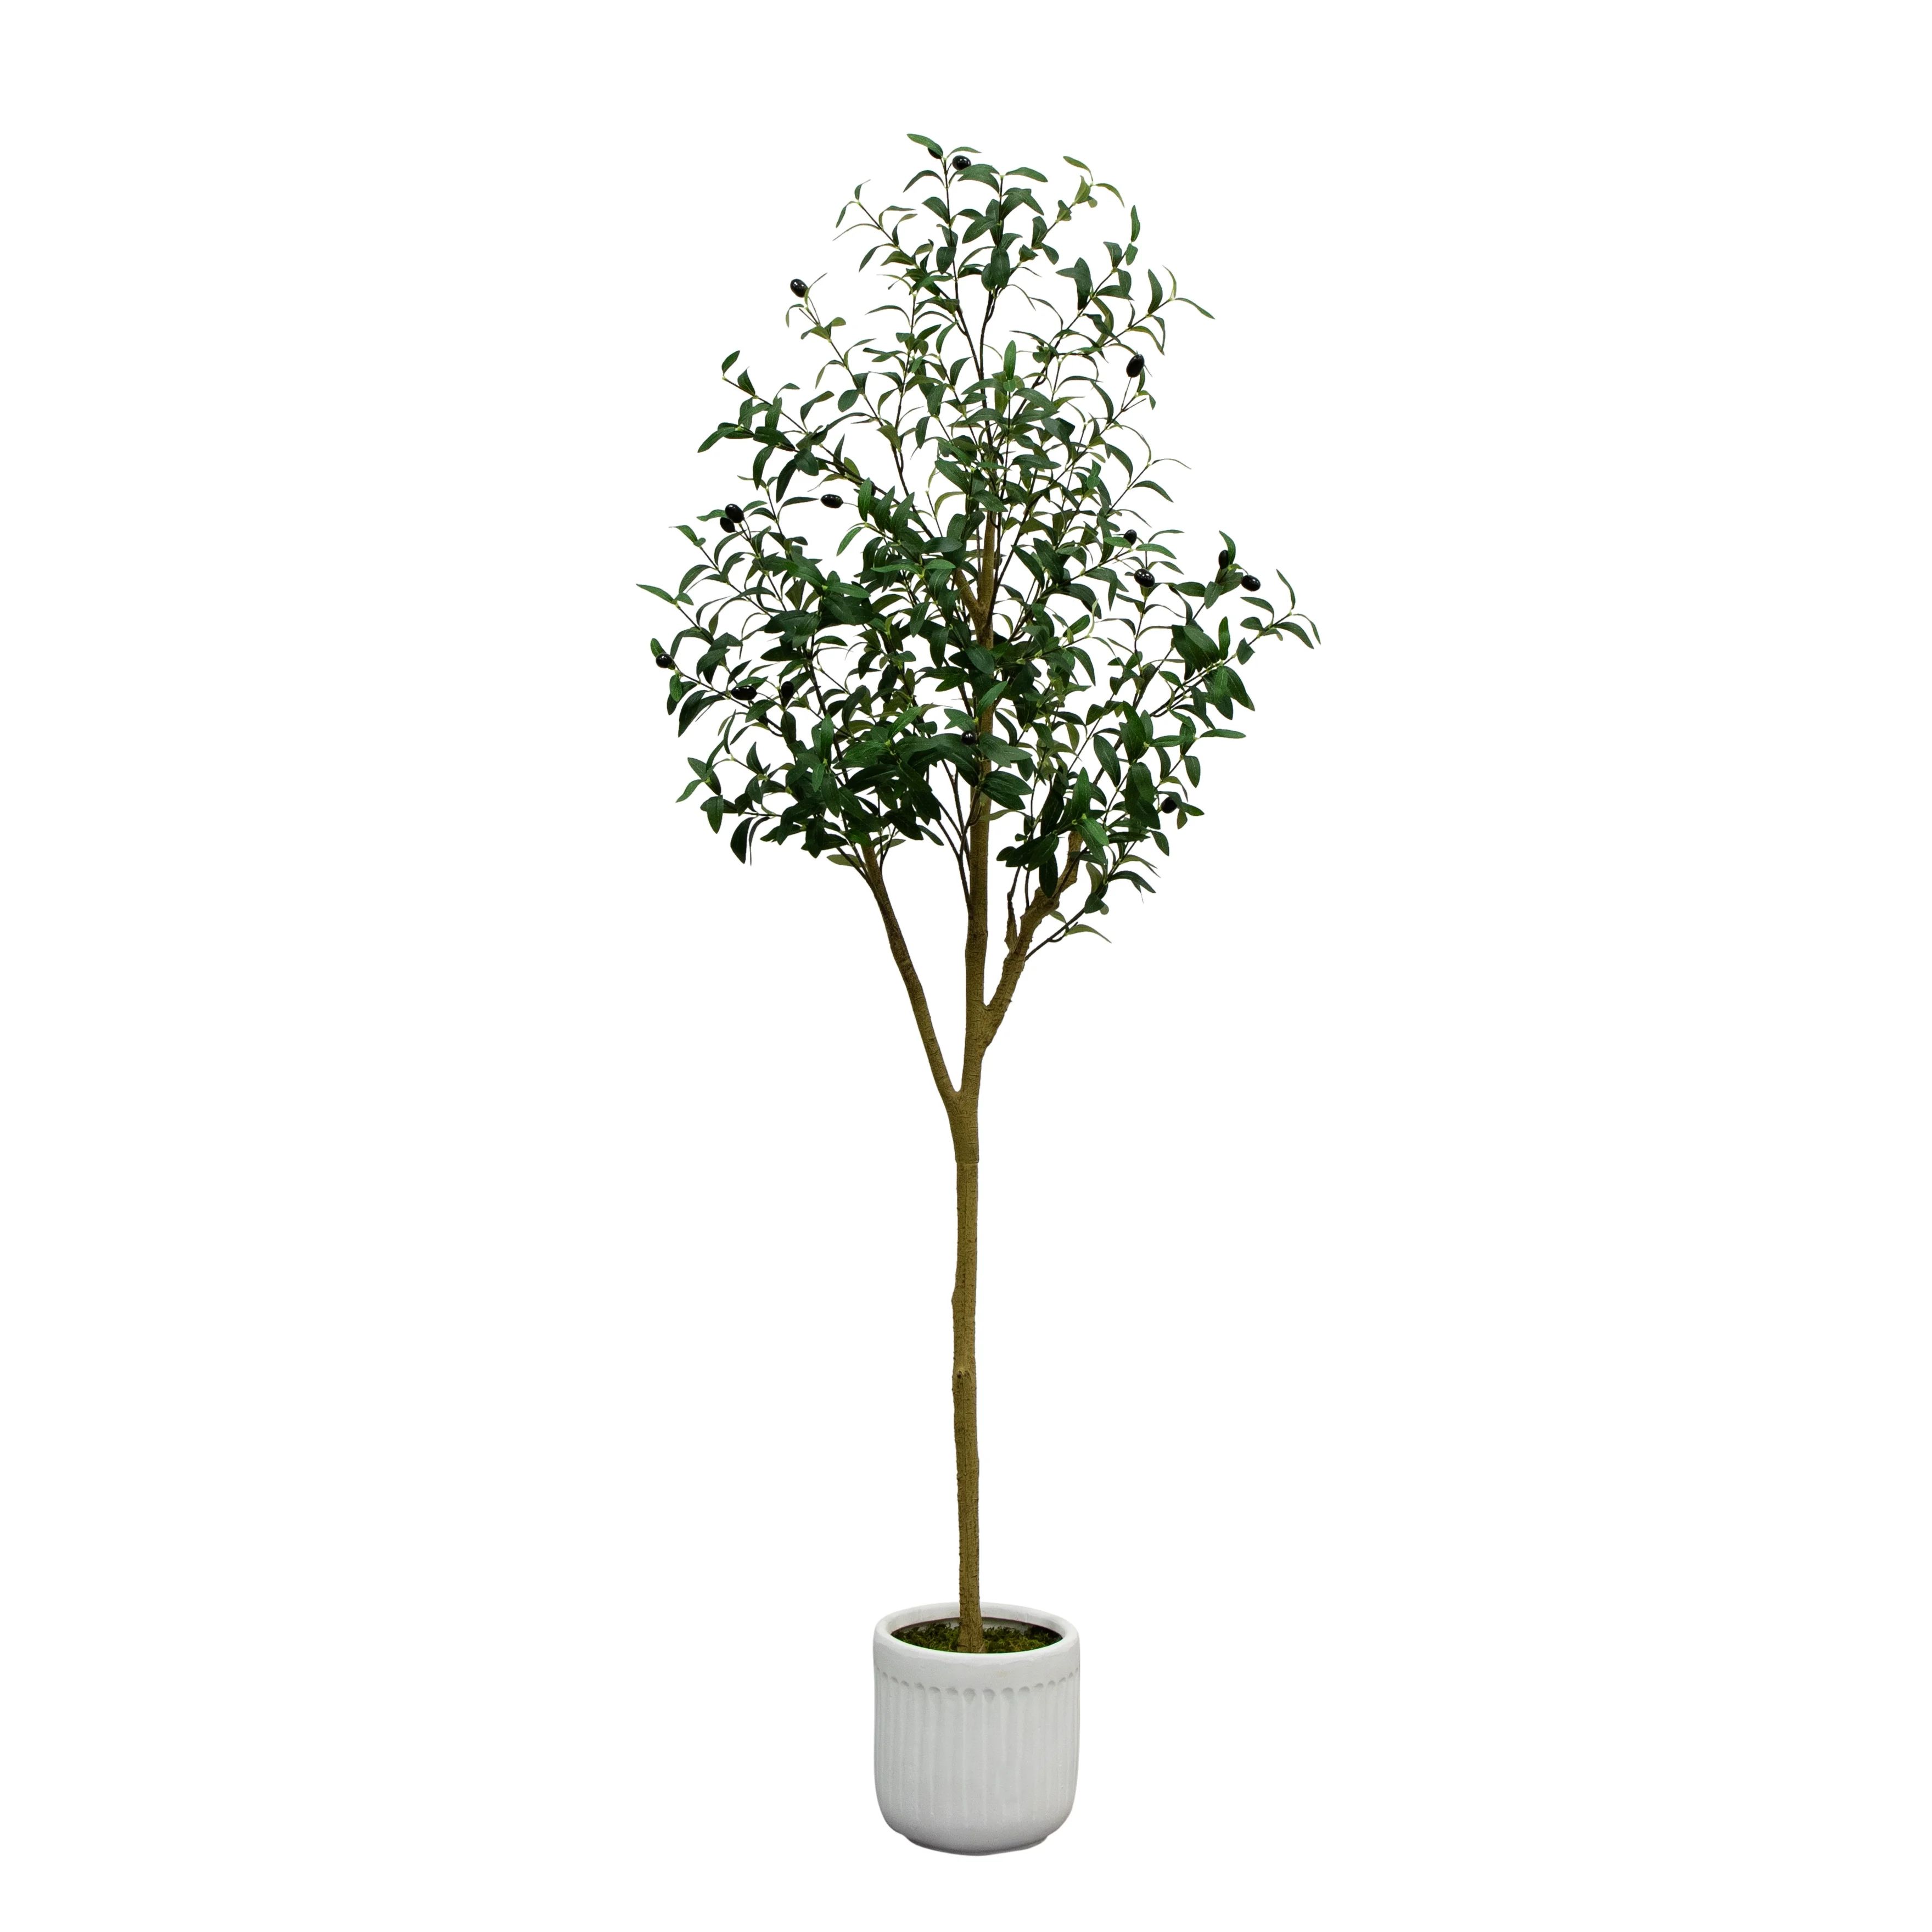 Better Homes & Gardens 6' Artificial Olive Tree in Ceramic Planter | Walmart (US)